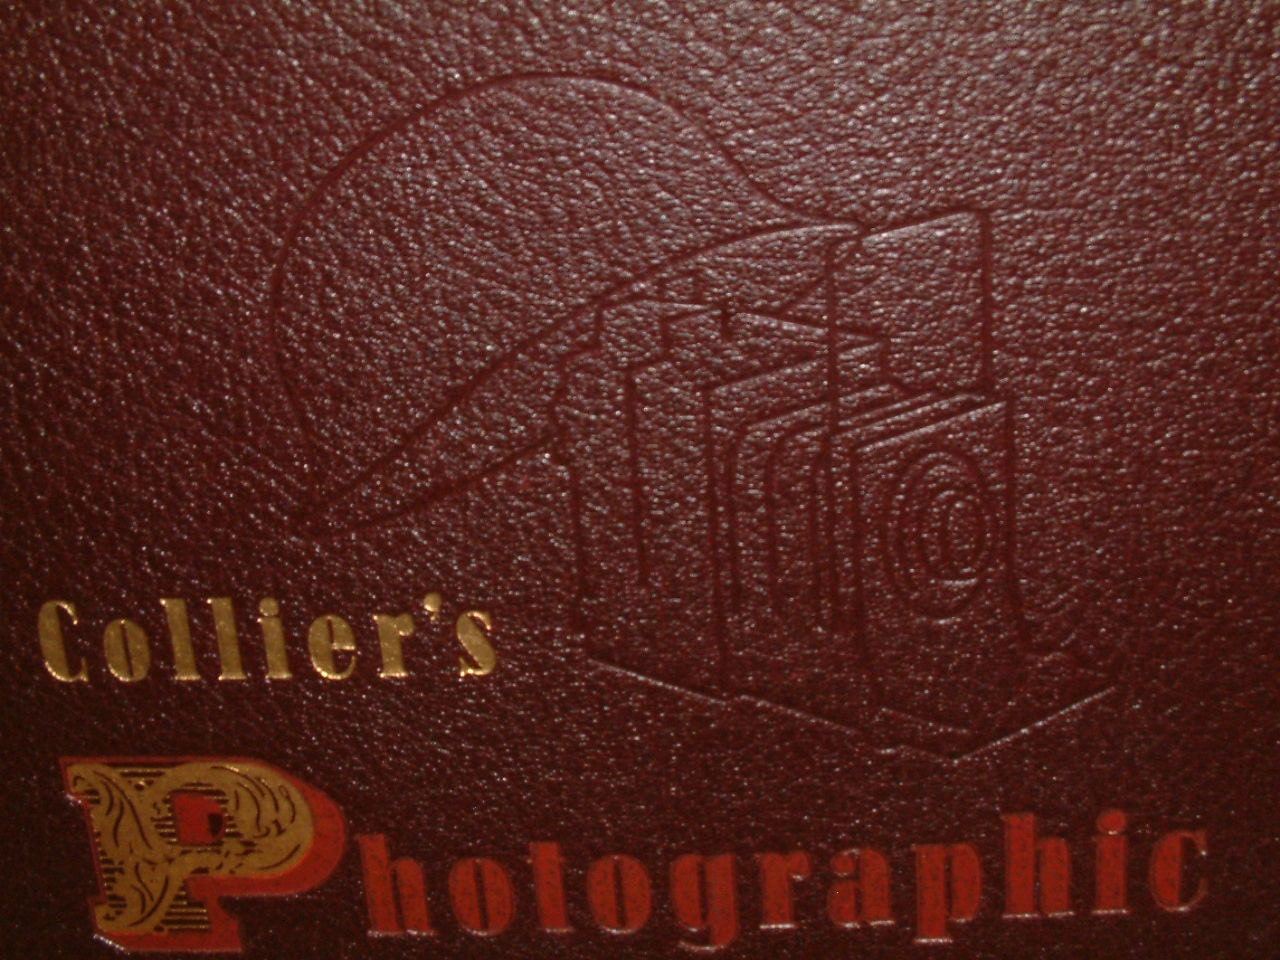 colliers photographic history of the european war